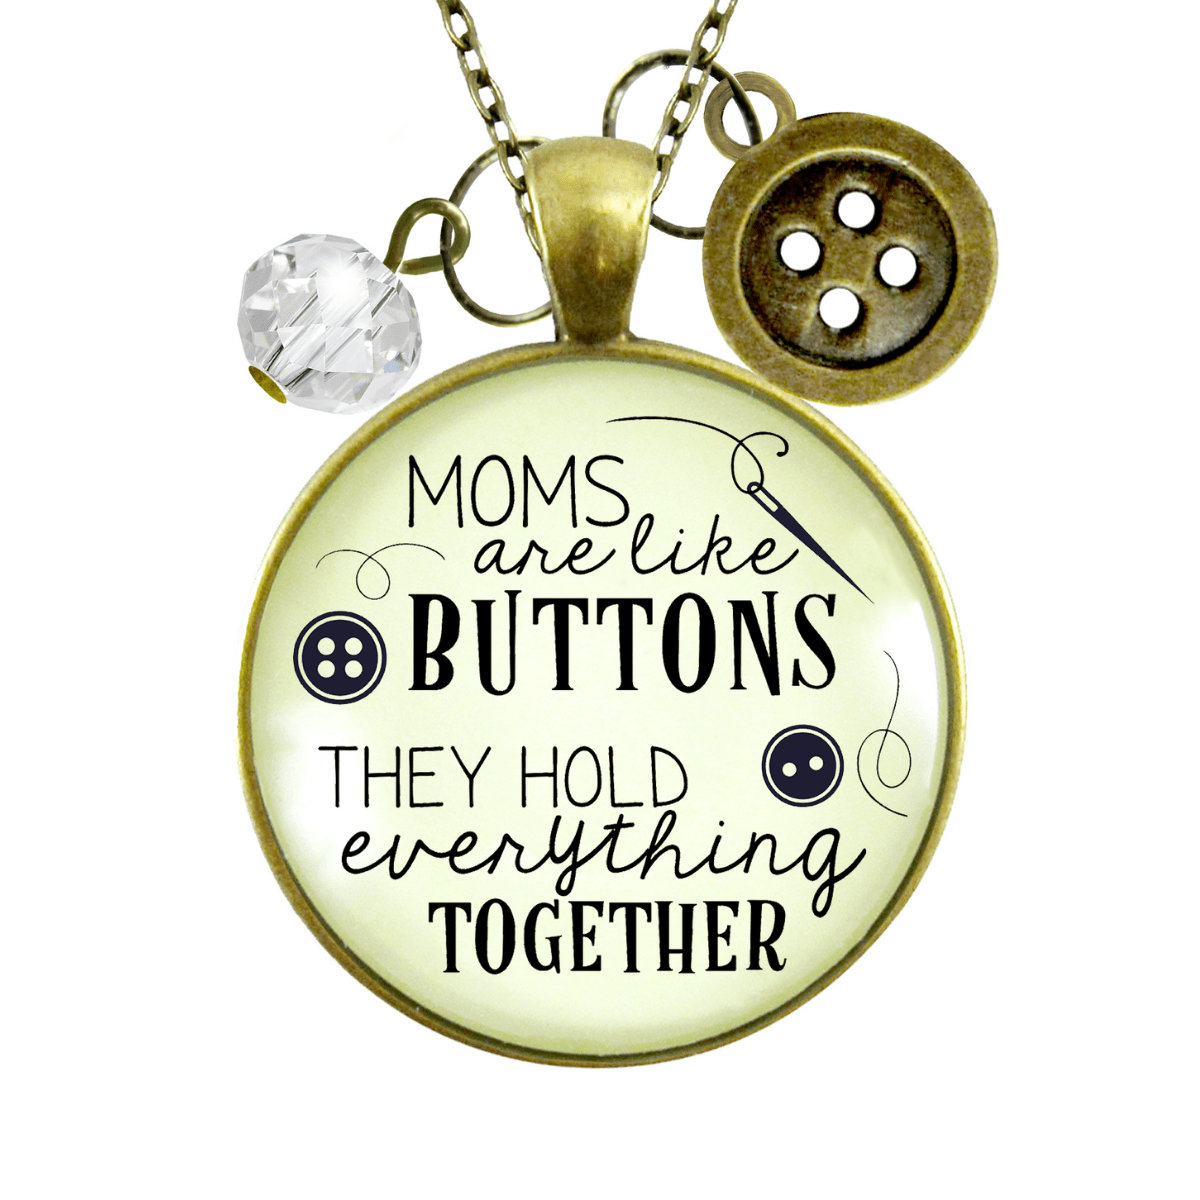 Gutsy Goodness Family Necklace Moms Like Buttons Mother Seamstress Jewelry Charm - Gutsy Goodness Handmade Jewelry;Family Necklace Moms Like Buttons Mother Seamstress Jewelry Charm - Gutsy Goodness Handmade Jewelry Gifts